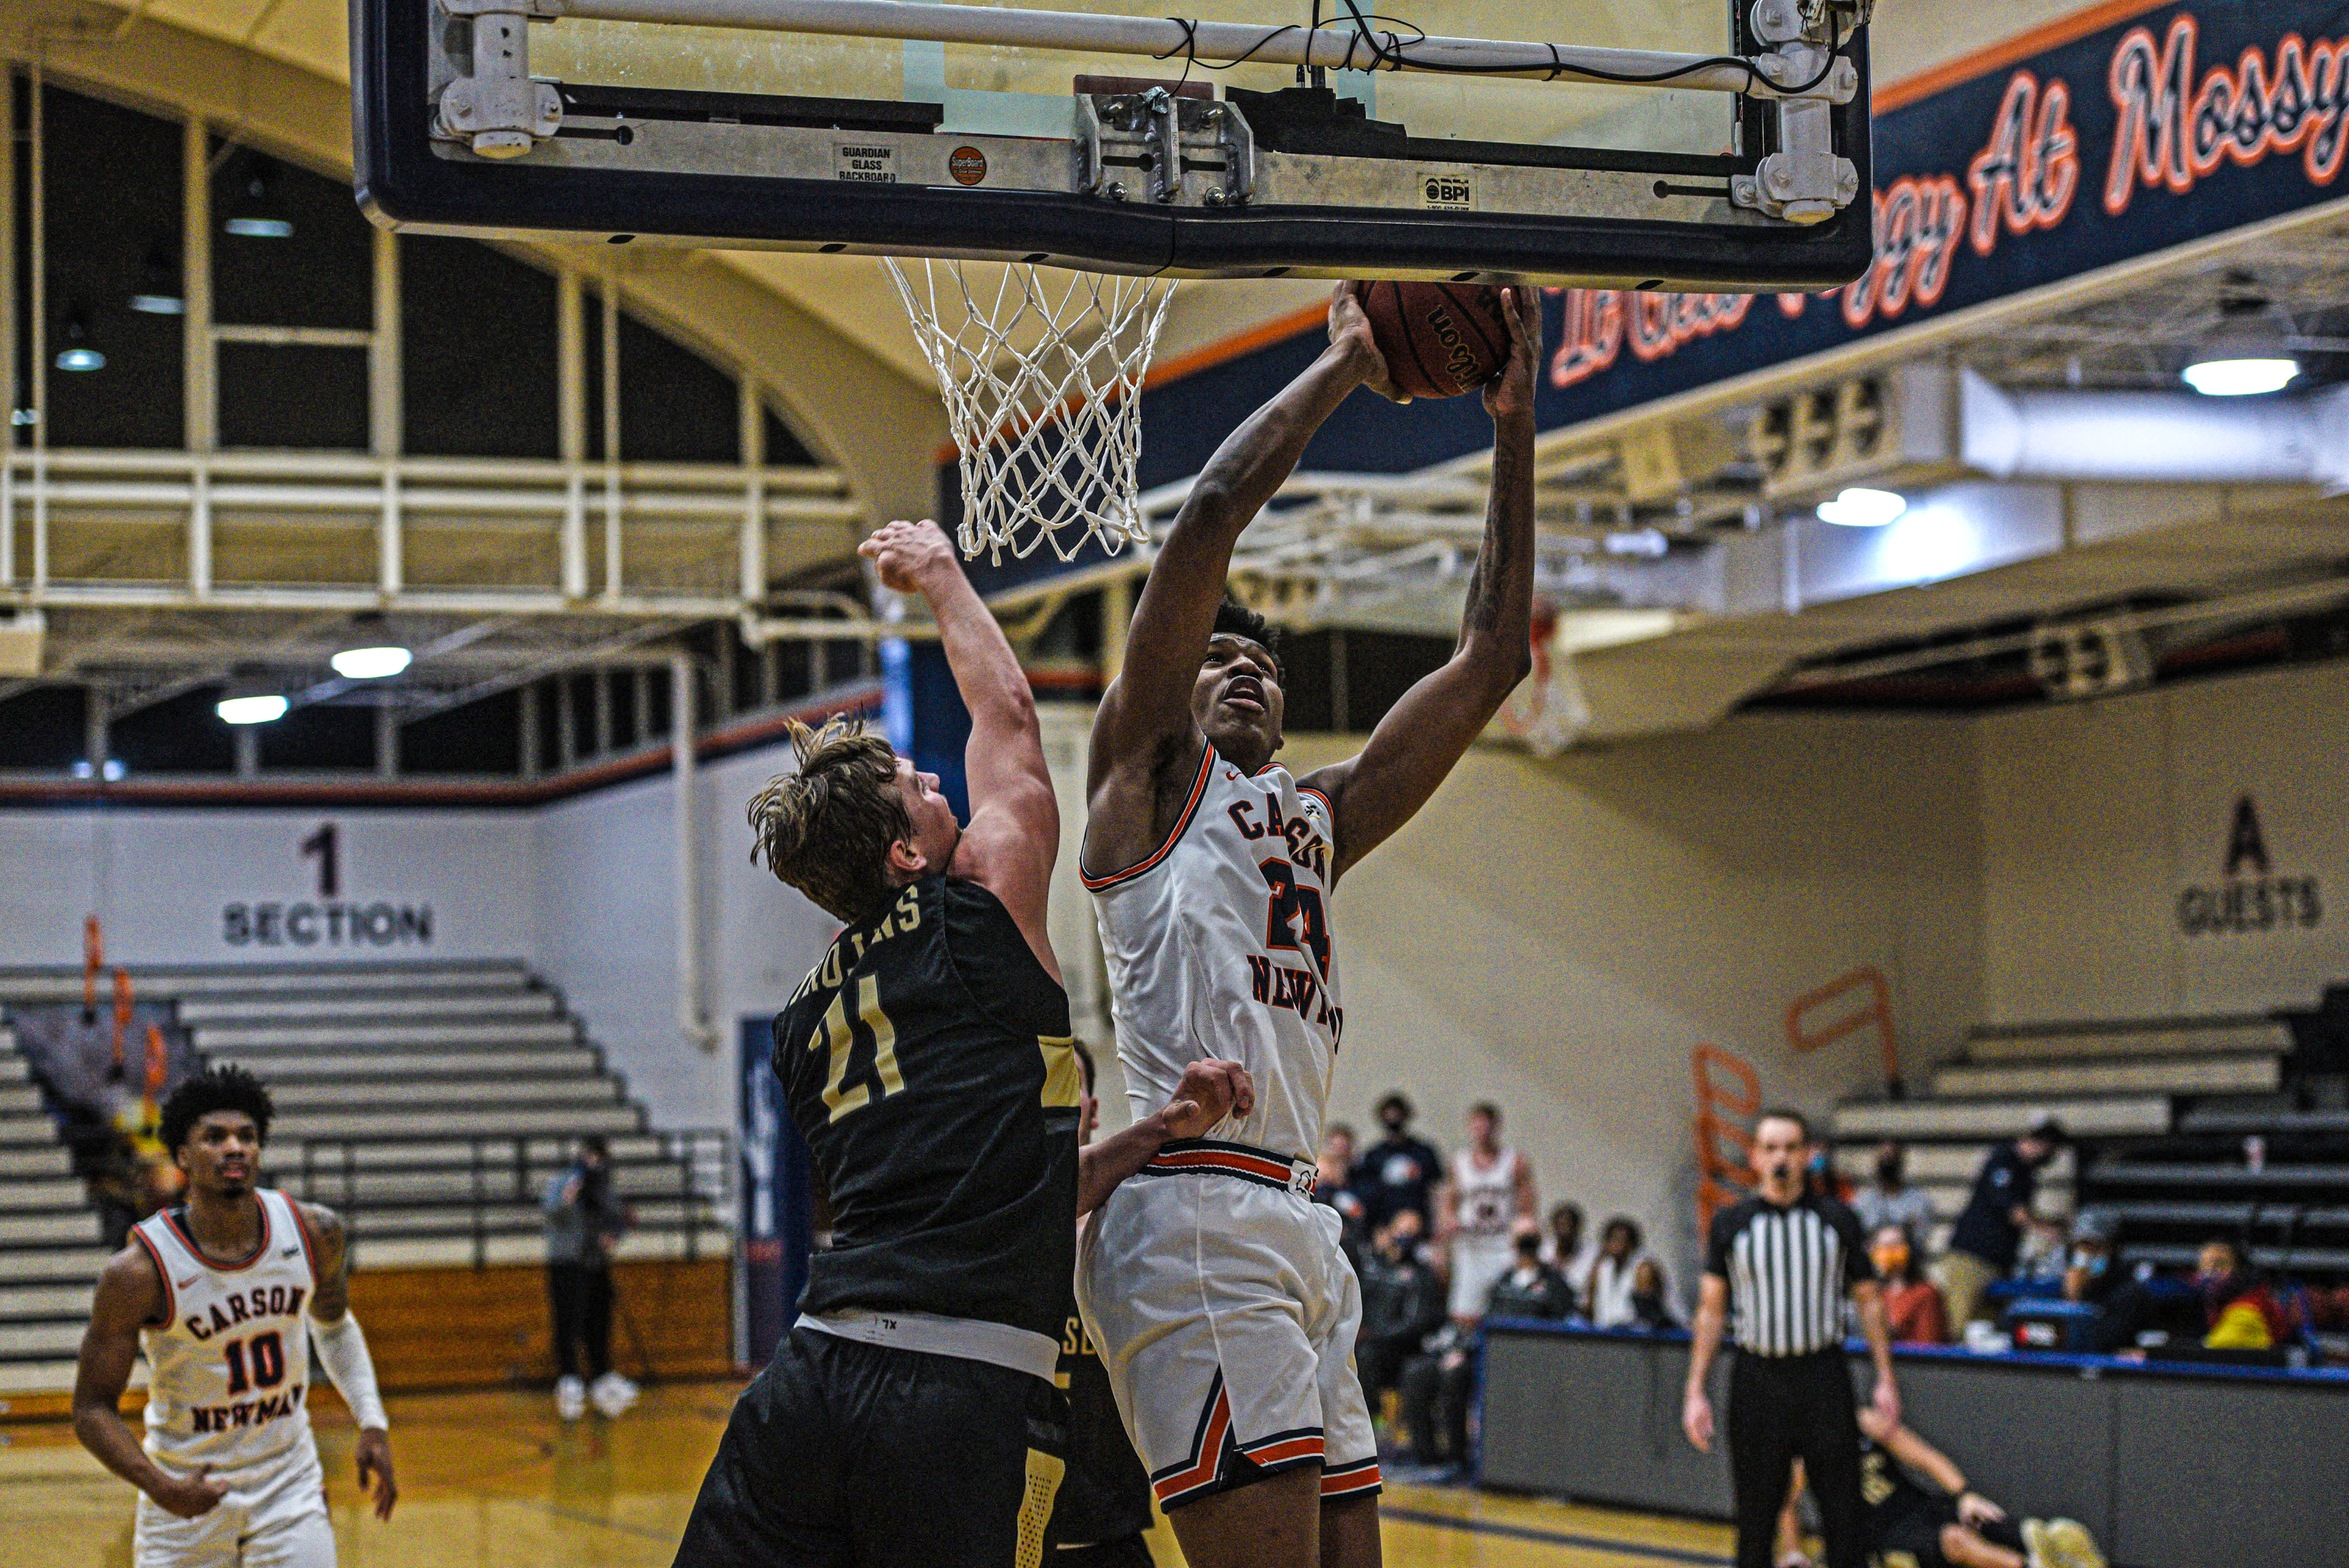 Carson-Newman ransacks Anderson thanks to otherworldly first half